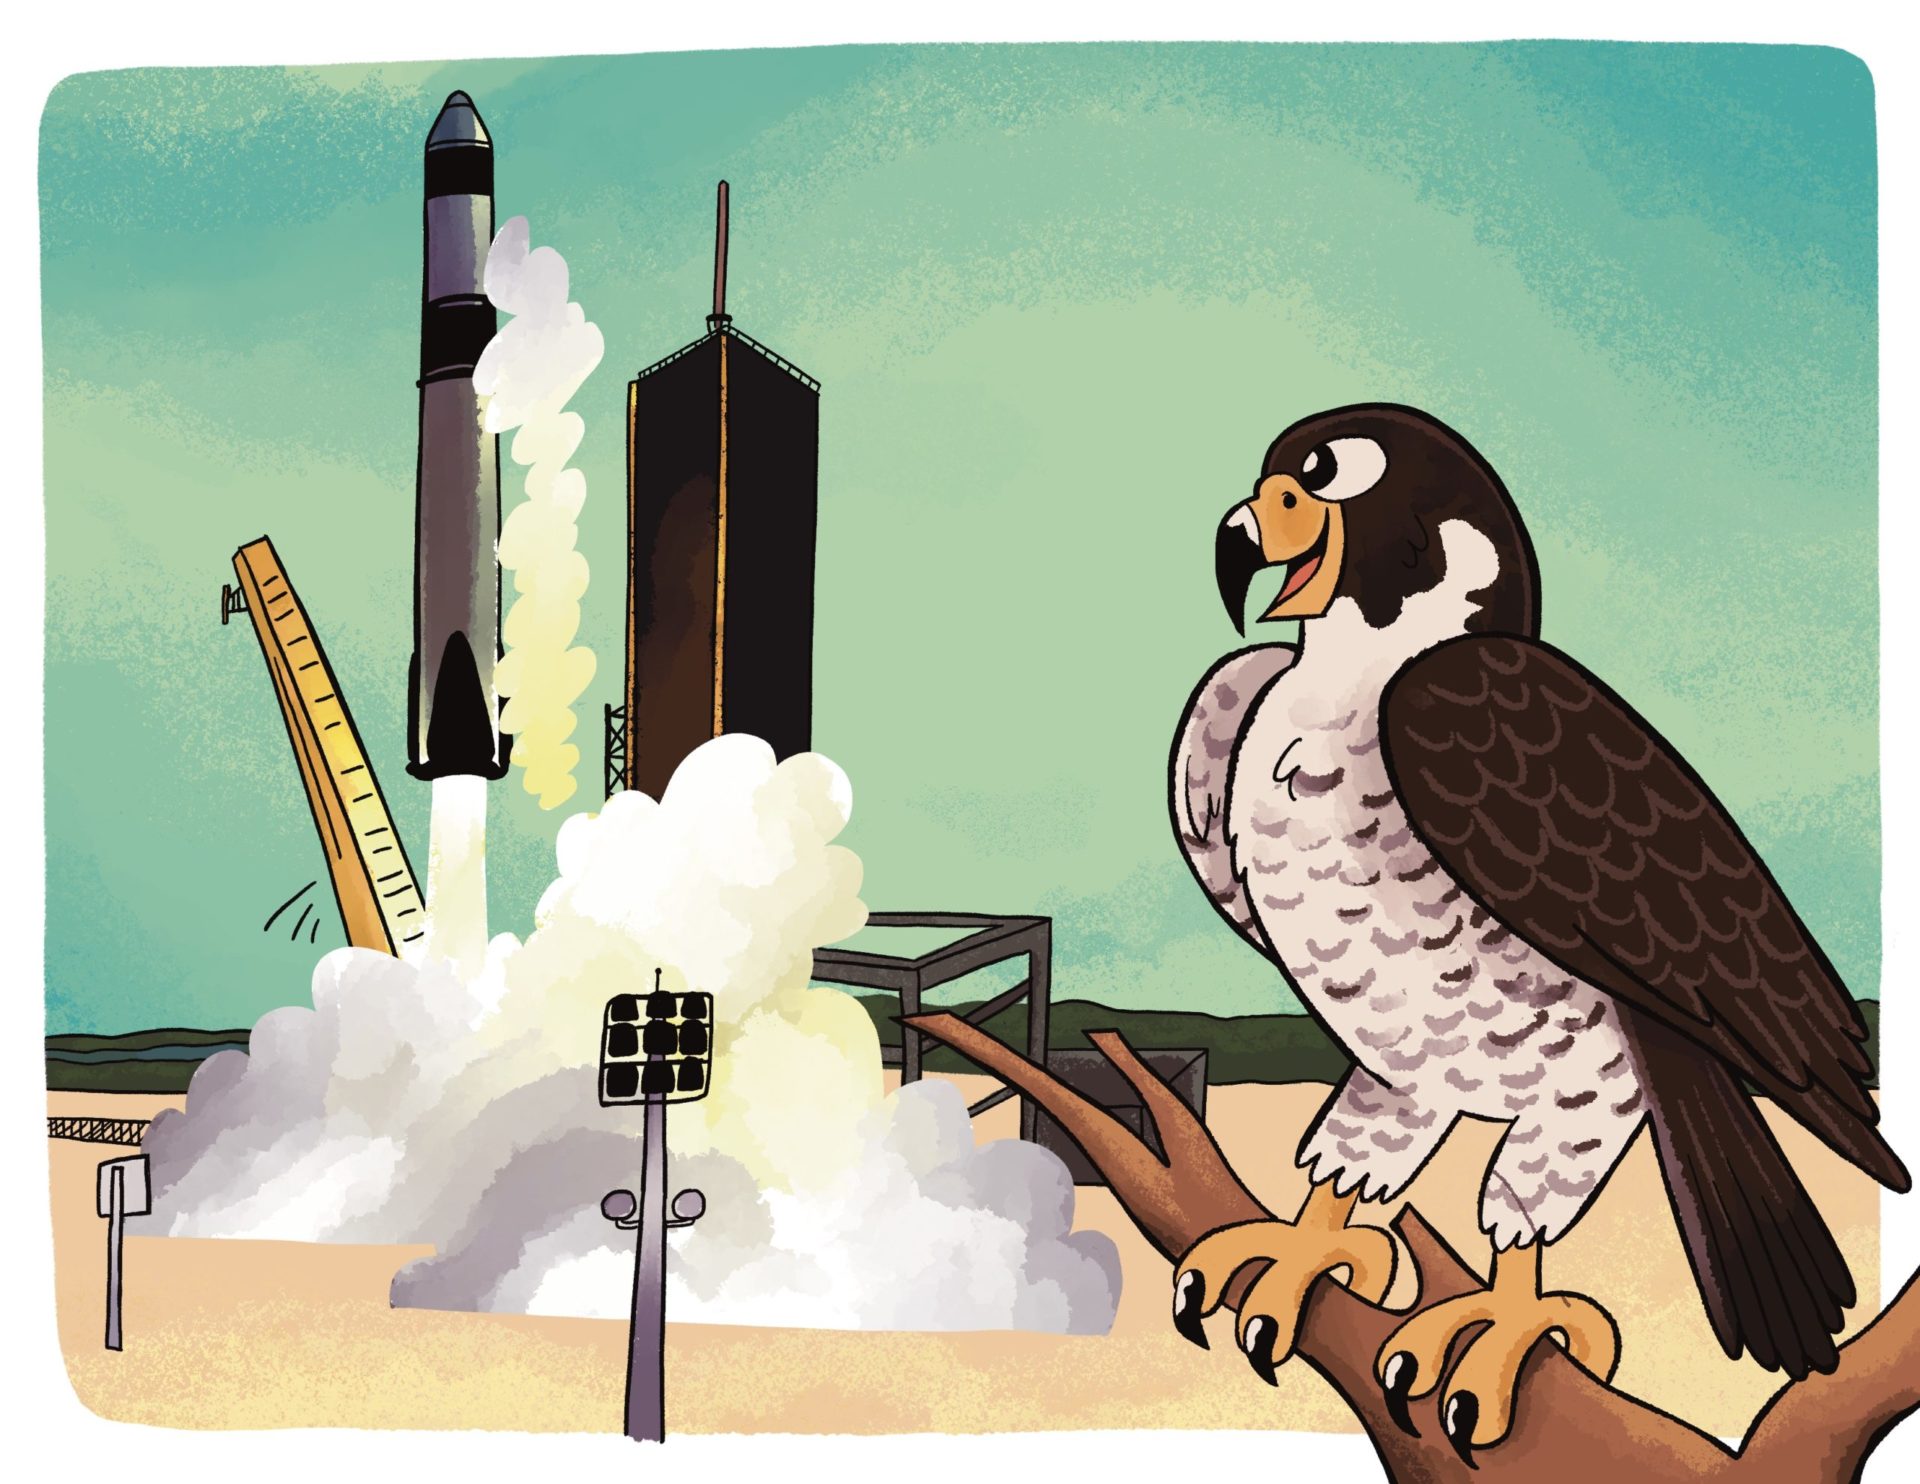 Illustration of a falcon perched on a branch, observing a rocket launch with a pencil and ruler in the background, set against a partly cloudy sky.